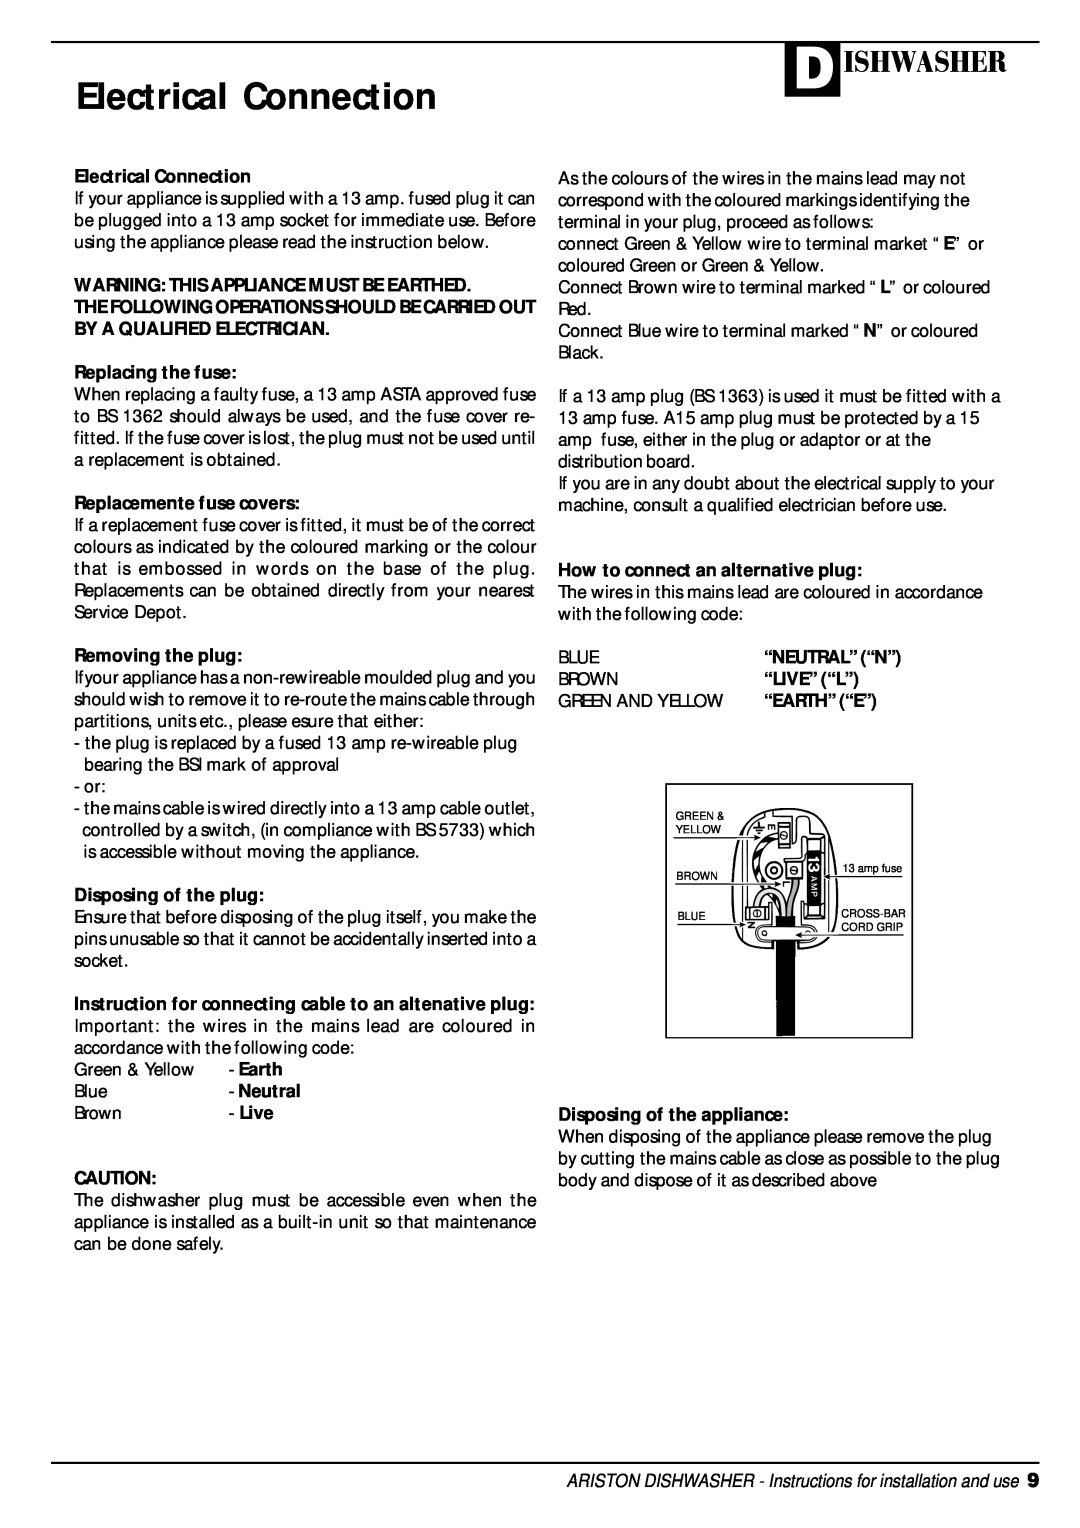 Ariston AFA 370 manual Electrical Connection, D Ishwasher, Warning This Appliance Must Be Earthed, Replacing the fuse, Live 